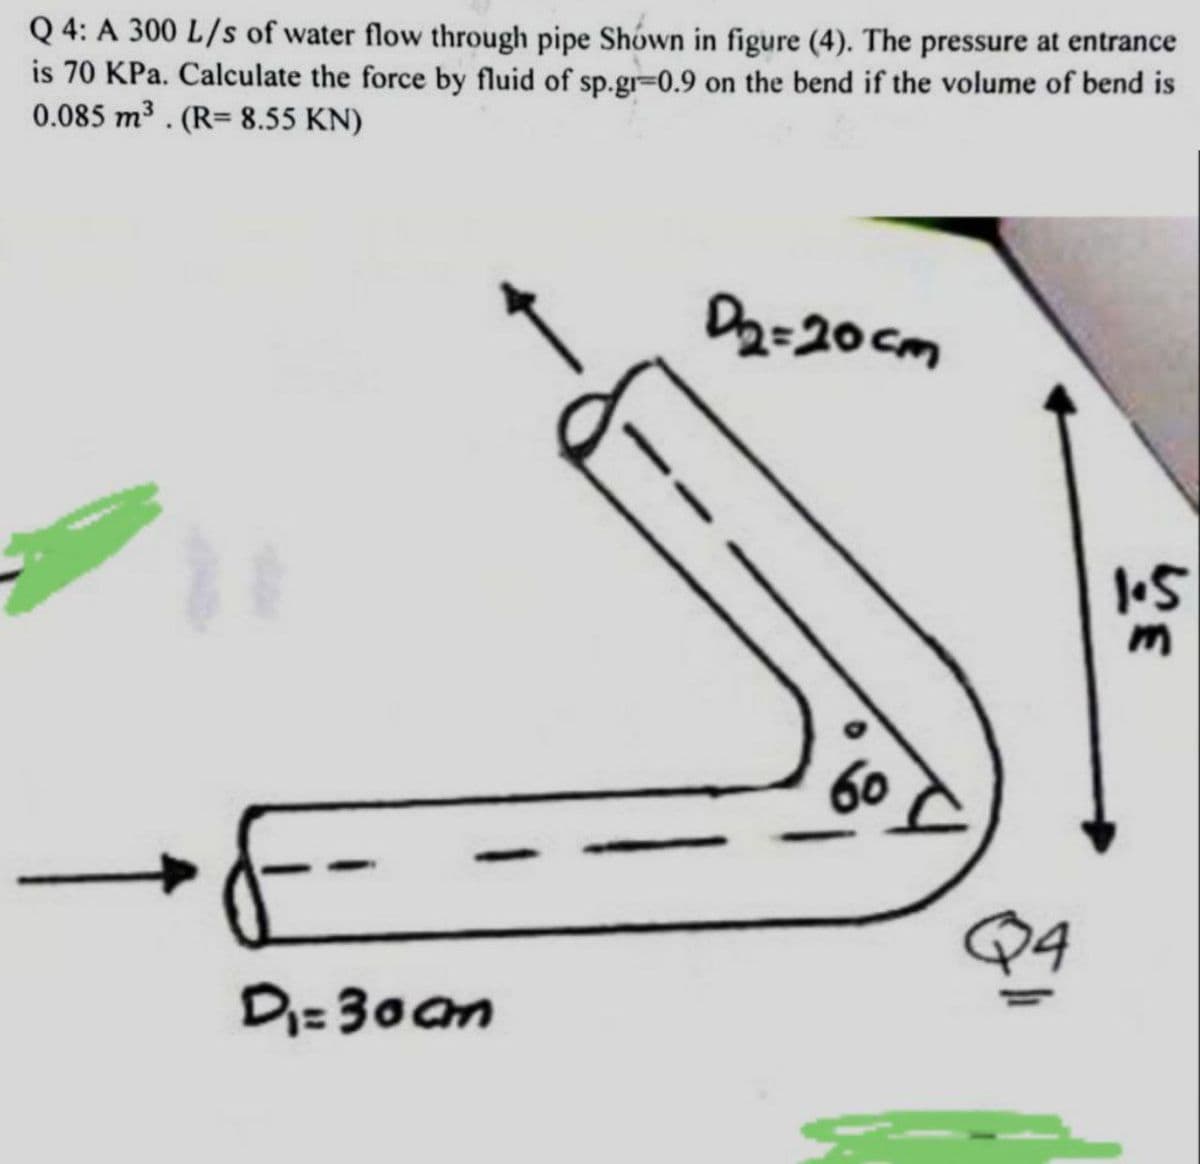 Q4: A 300 L/s of water flow through pipe Shown in figure (4). The pressure at entrance
is 70 KPa. Calculate the force by fluid of sp.gr-0.9 on the bend if the volume of bend is
0.085 m³. (R= 8.55 KN)
D₁=30cm
D₂=20cm
6
Q4
1.5